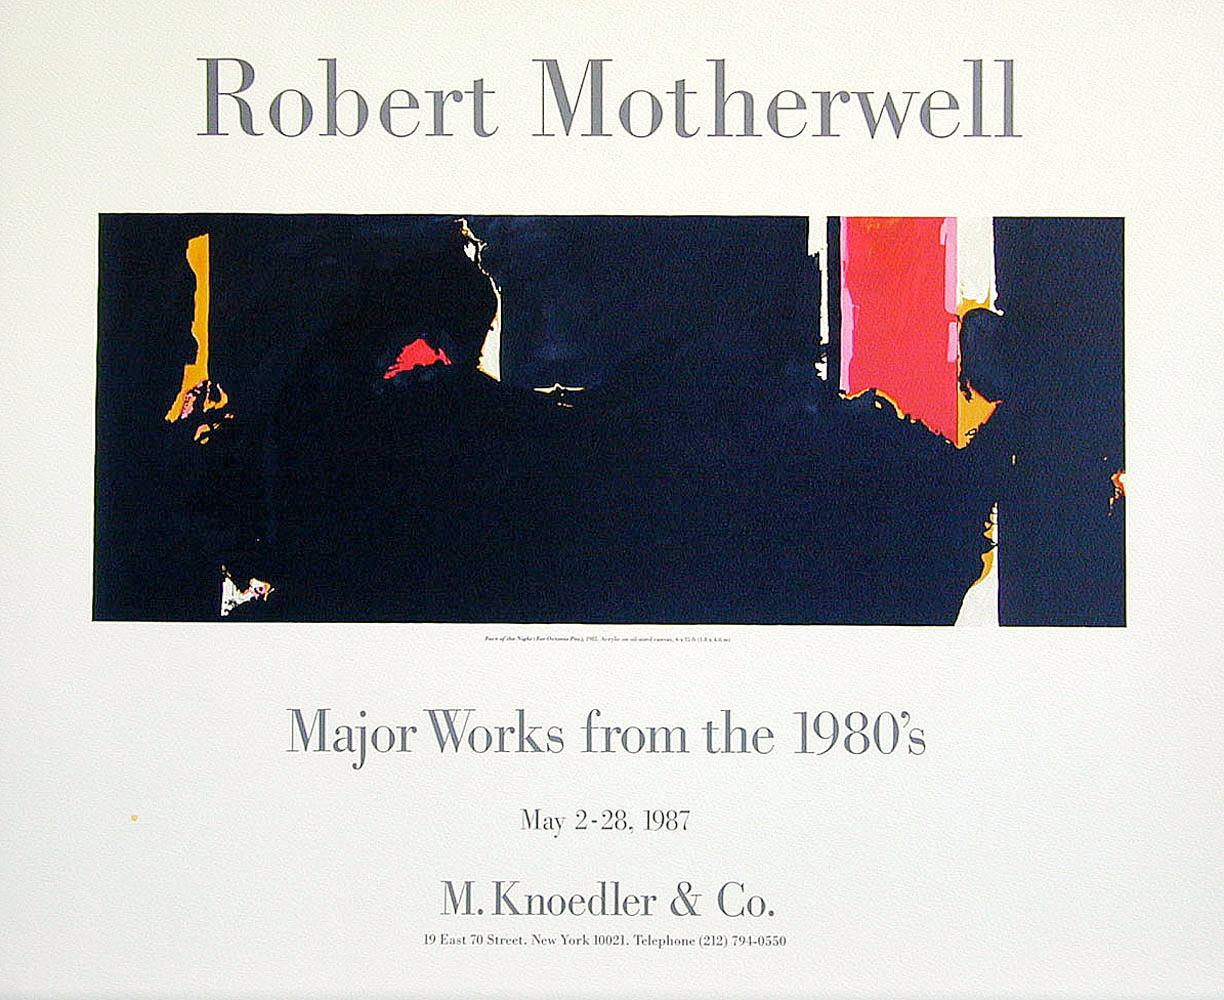 (after) Robert Motherwell Abstract Print - FACE OF THE NIGHT(Octavio Paz)Lithograph Abstract Expressionist, Black Red Gold